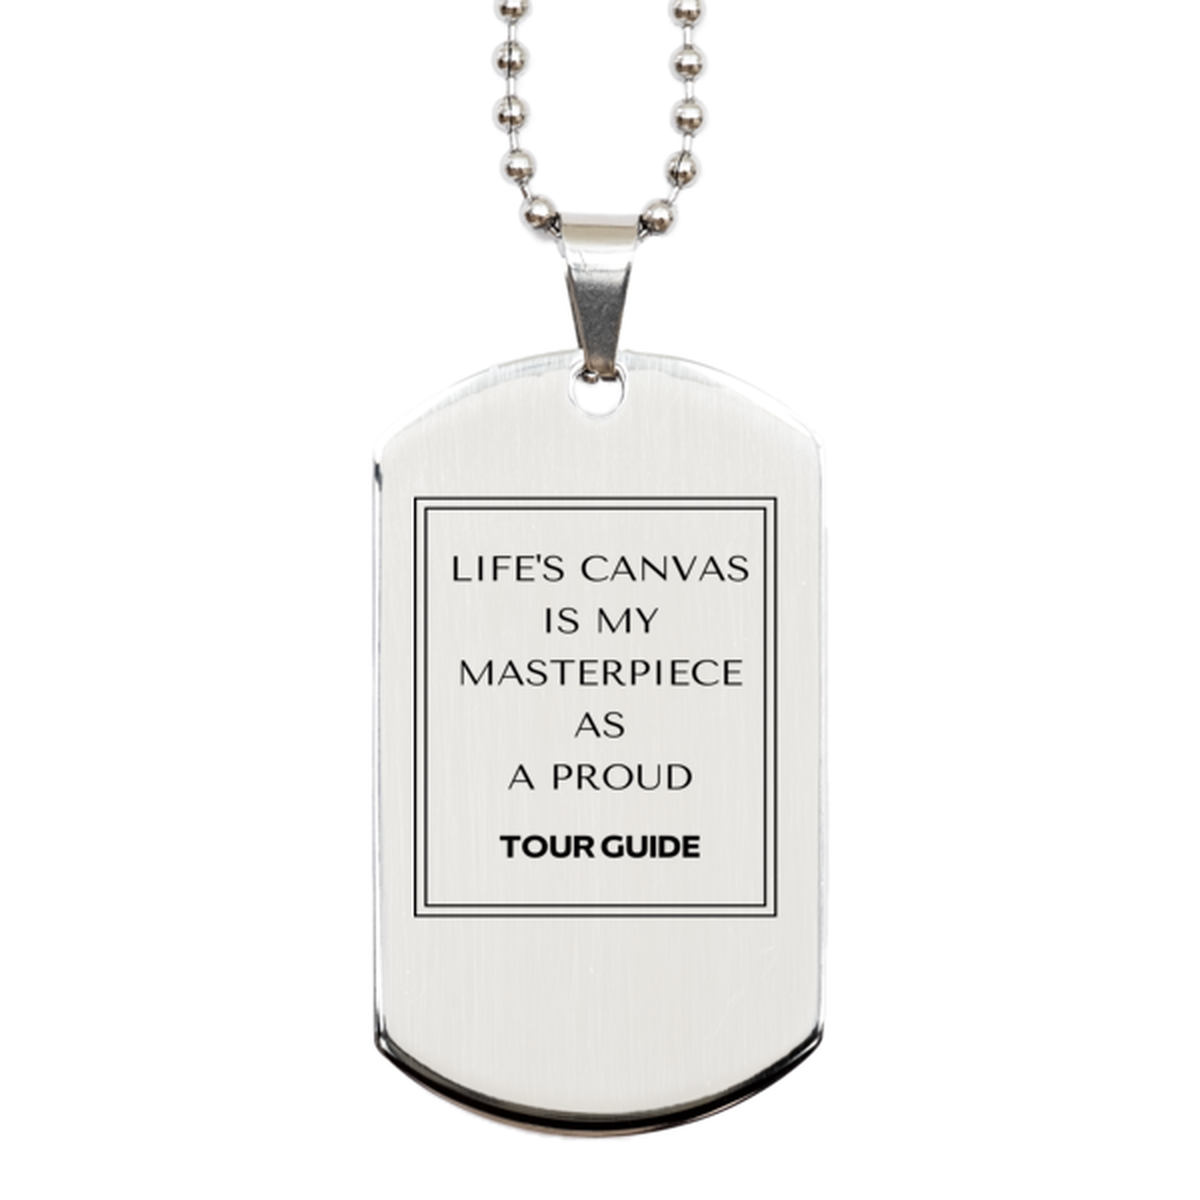 Proud Tour Guide Gifts, Life's canvas is my masterpiece, Epic Birthday Christmas Unique Silver Dog Tag For Tour Guide, Coworkers, Men, Women, Friends